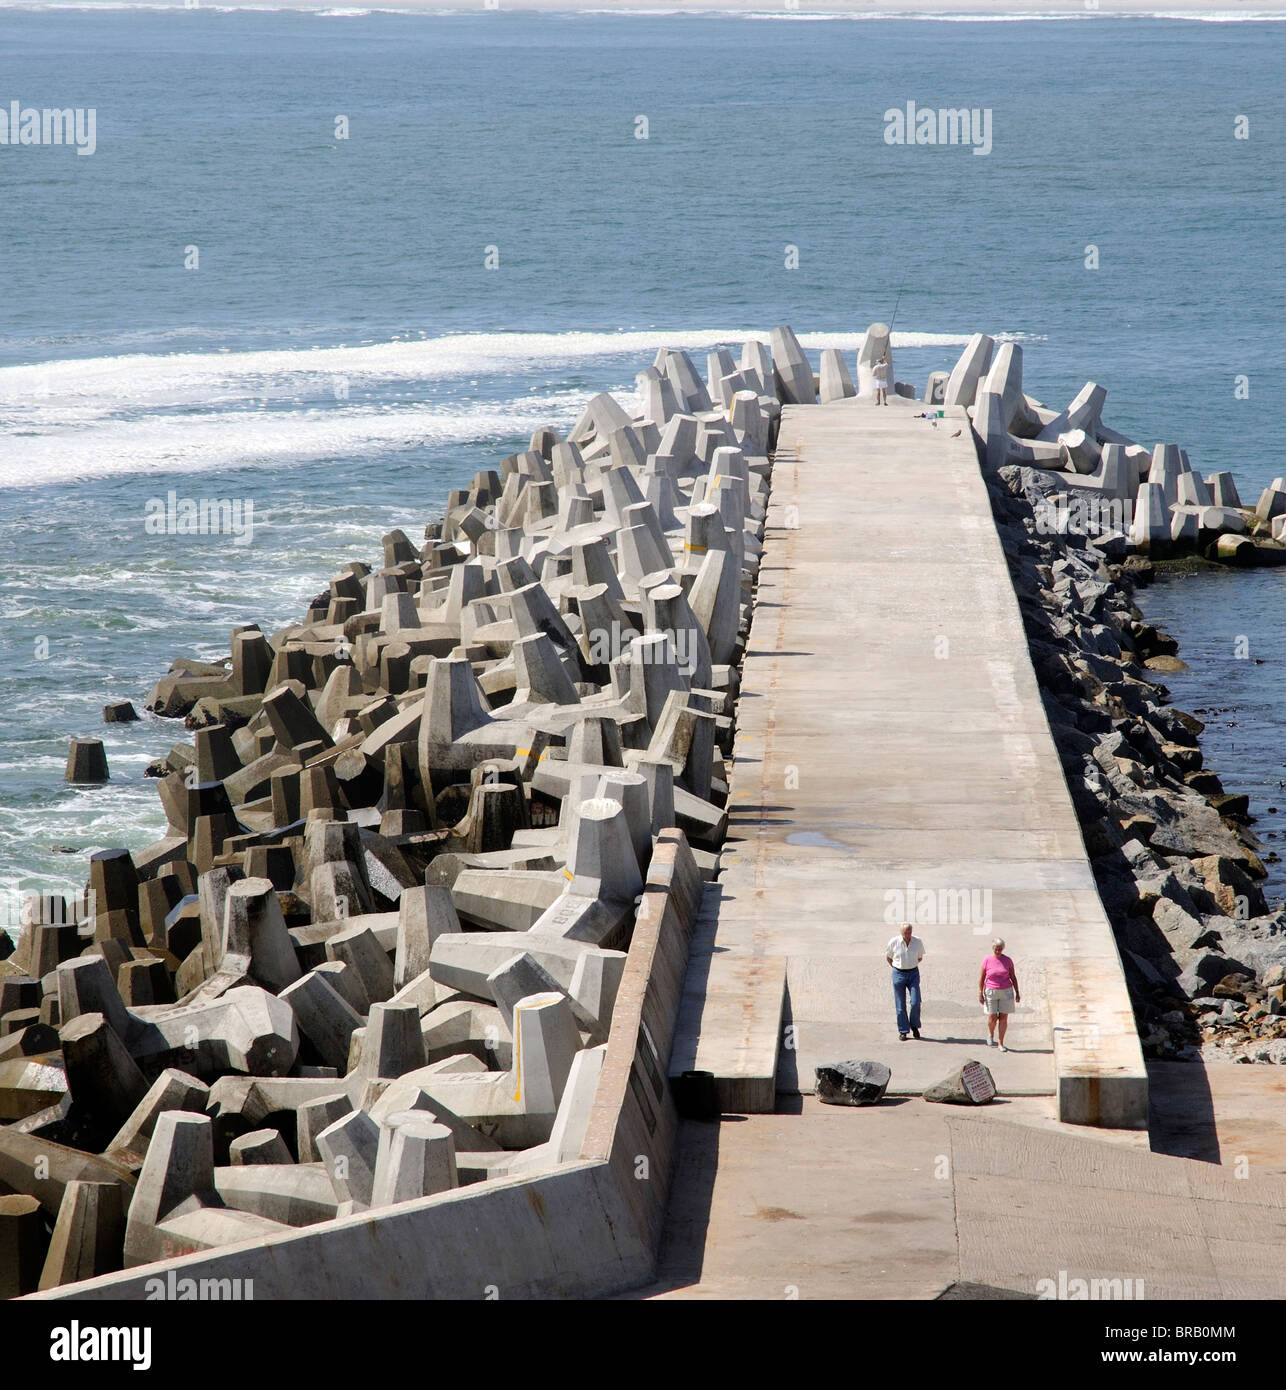 Dolosse protect the harbour wall at Yzerfontein a popular seaside resort on the west coast of South Africa Stock Photo